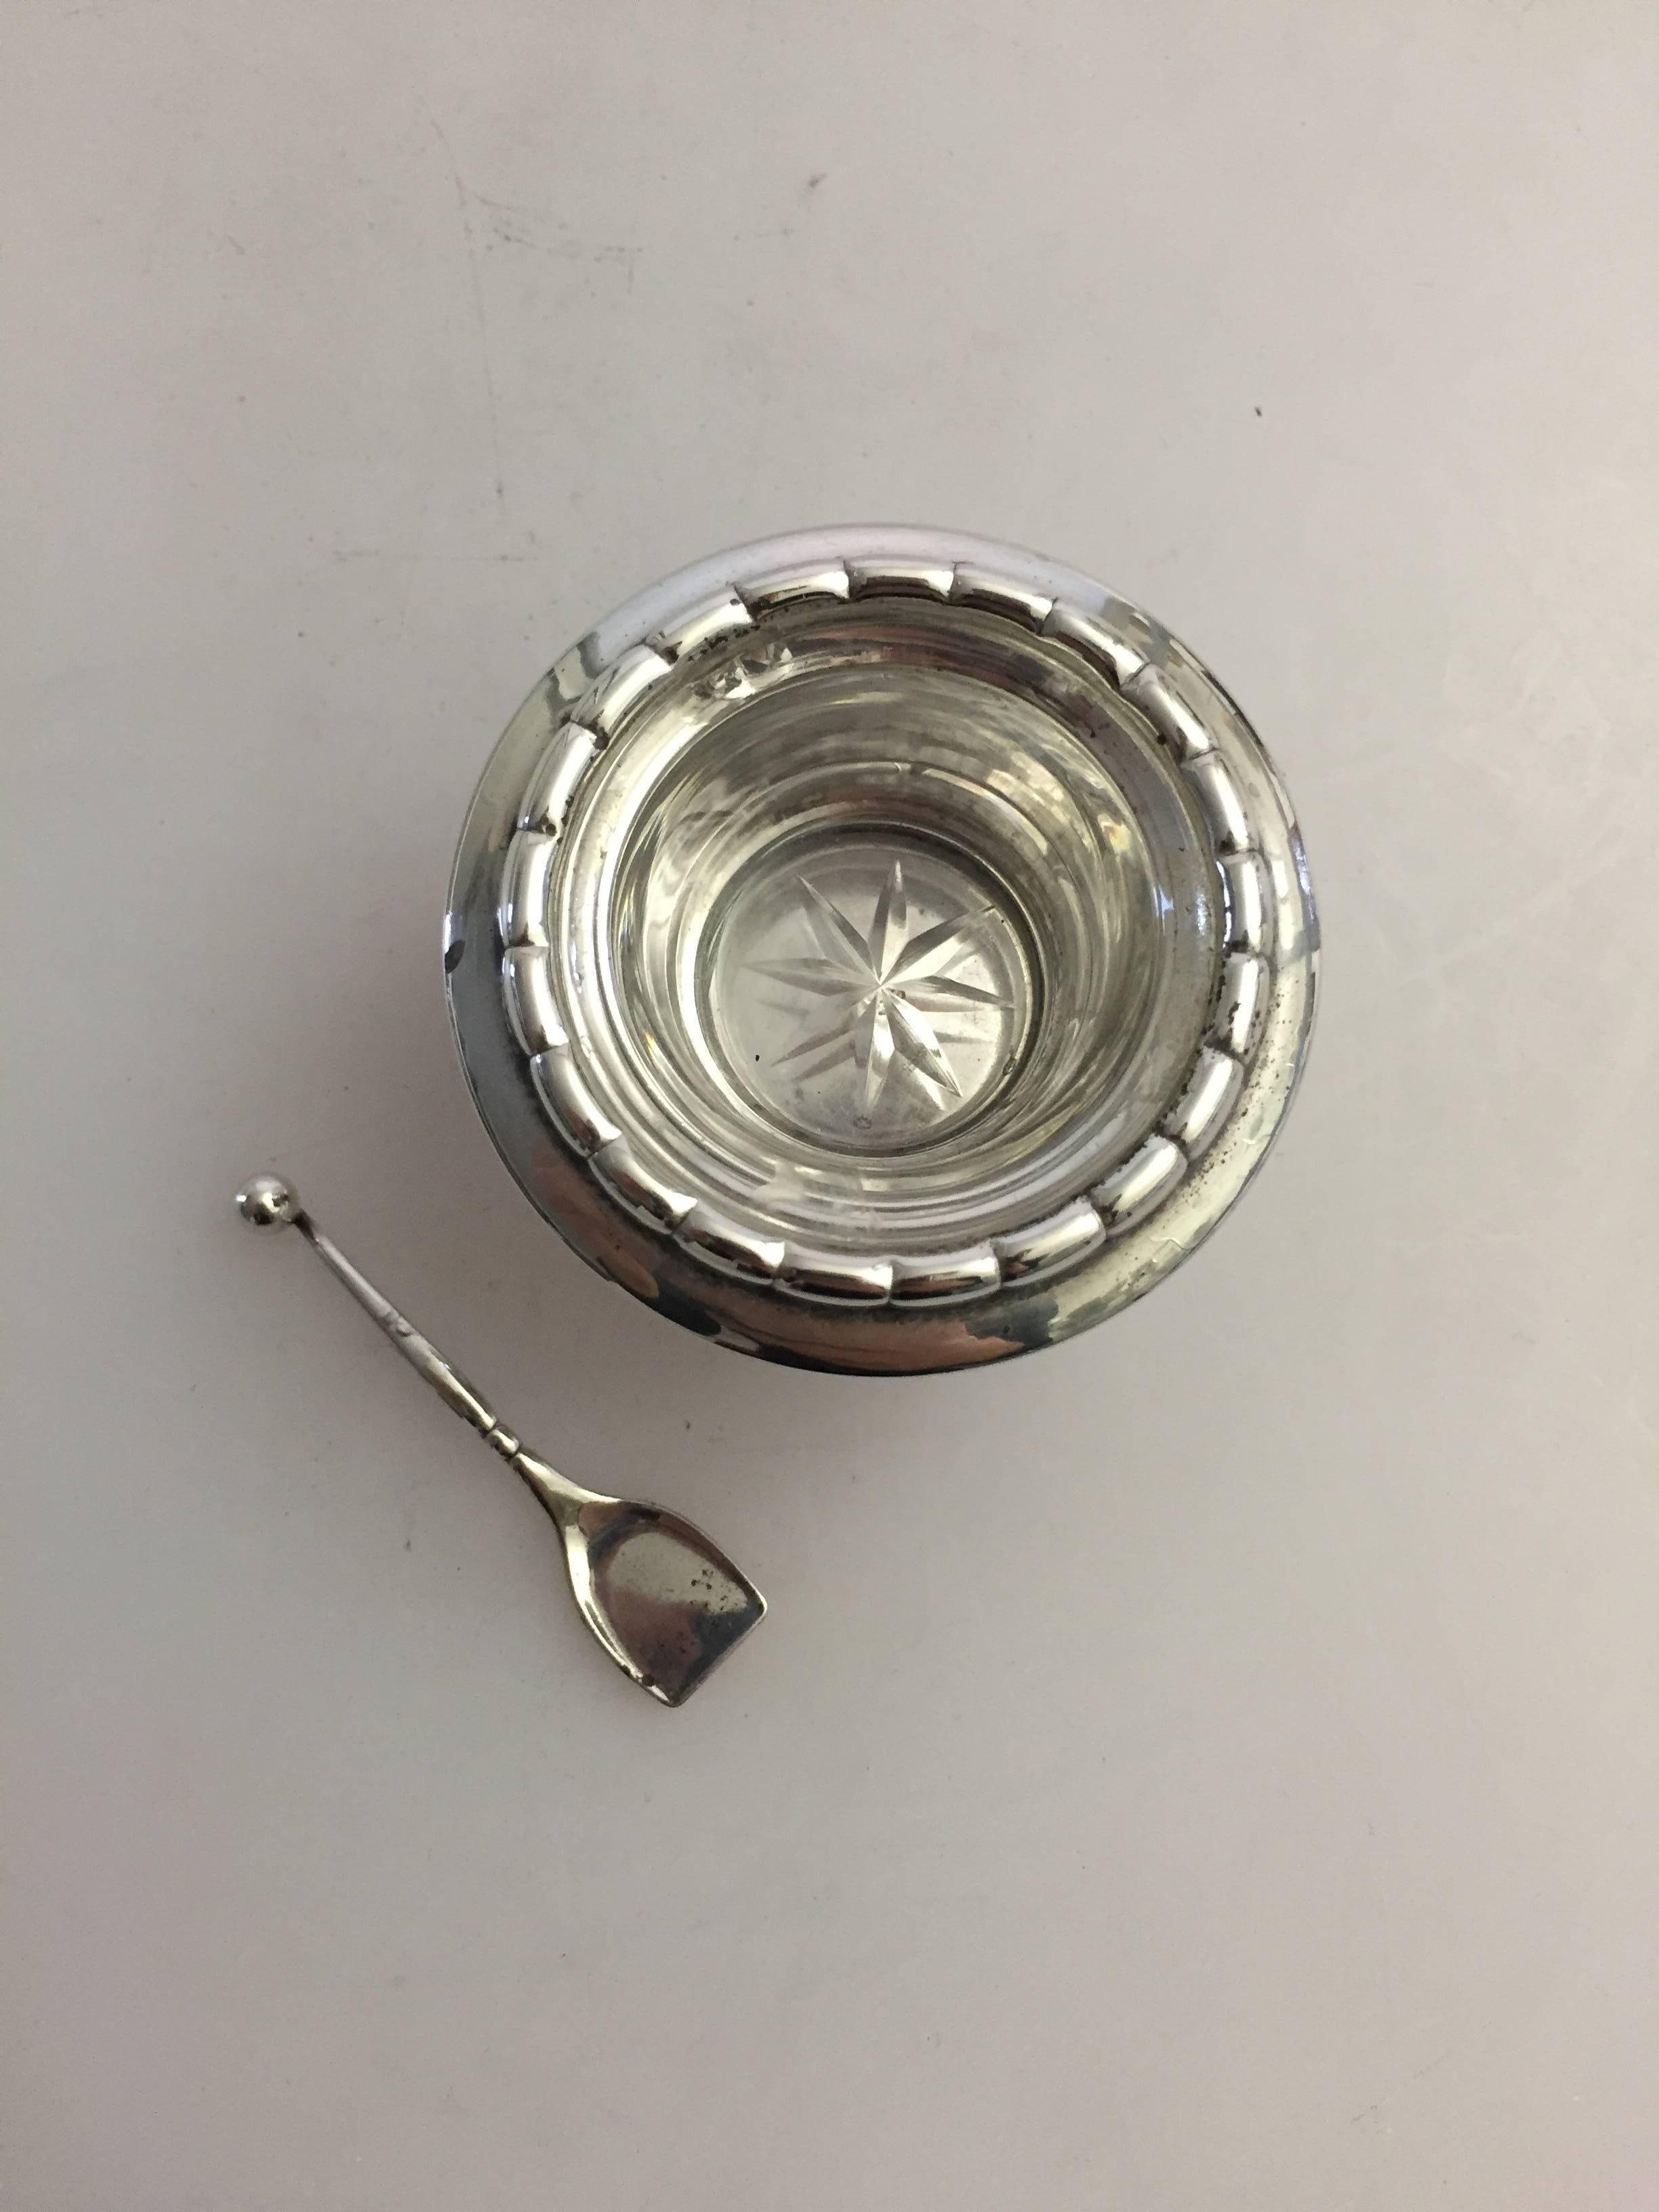 Georg Jensen sterling silver salt dish #236 and spoon #130. The salt dish comes with an original inserted glass cup. The glass have a few chips here and there but the dish can be used with or without the glass. Made with marks from